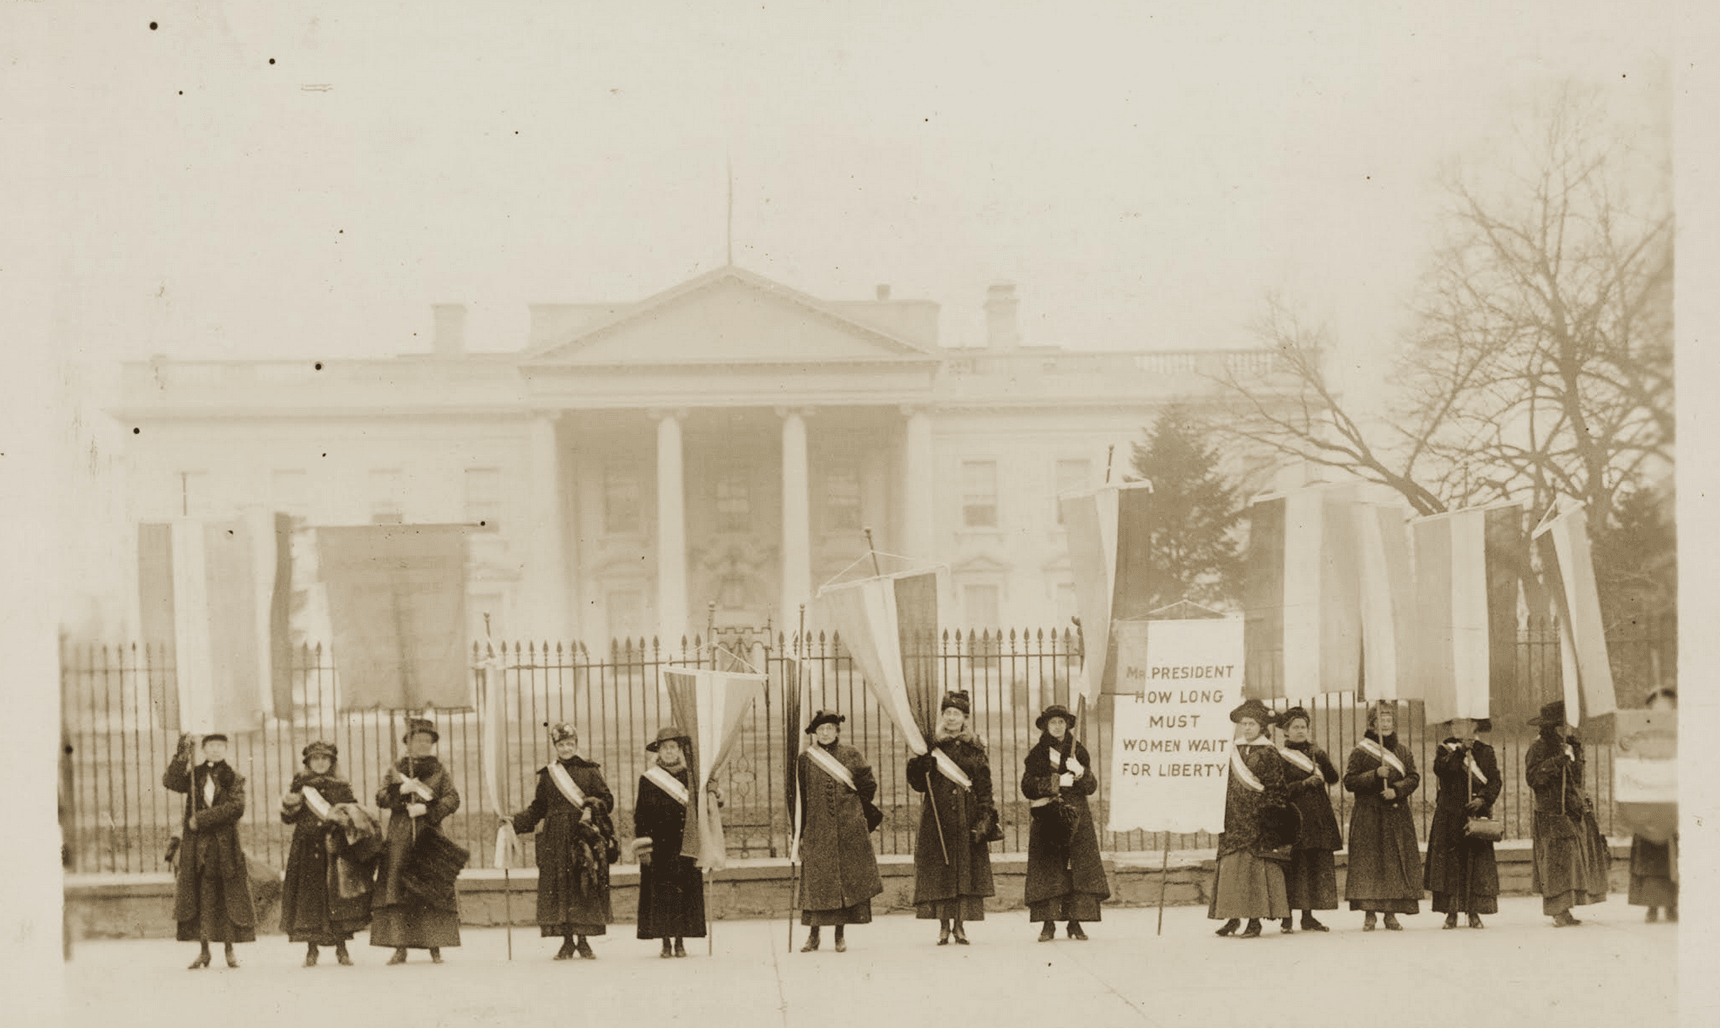 Suffrage - Suffragists Protesting in front of the White House, 1917-1919, Library of Congress. Photo courtesy Greenwich Historical Society